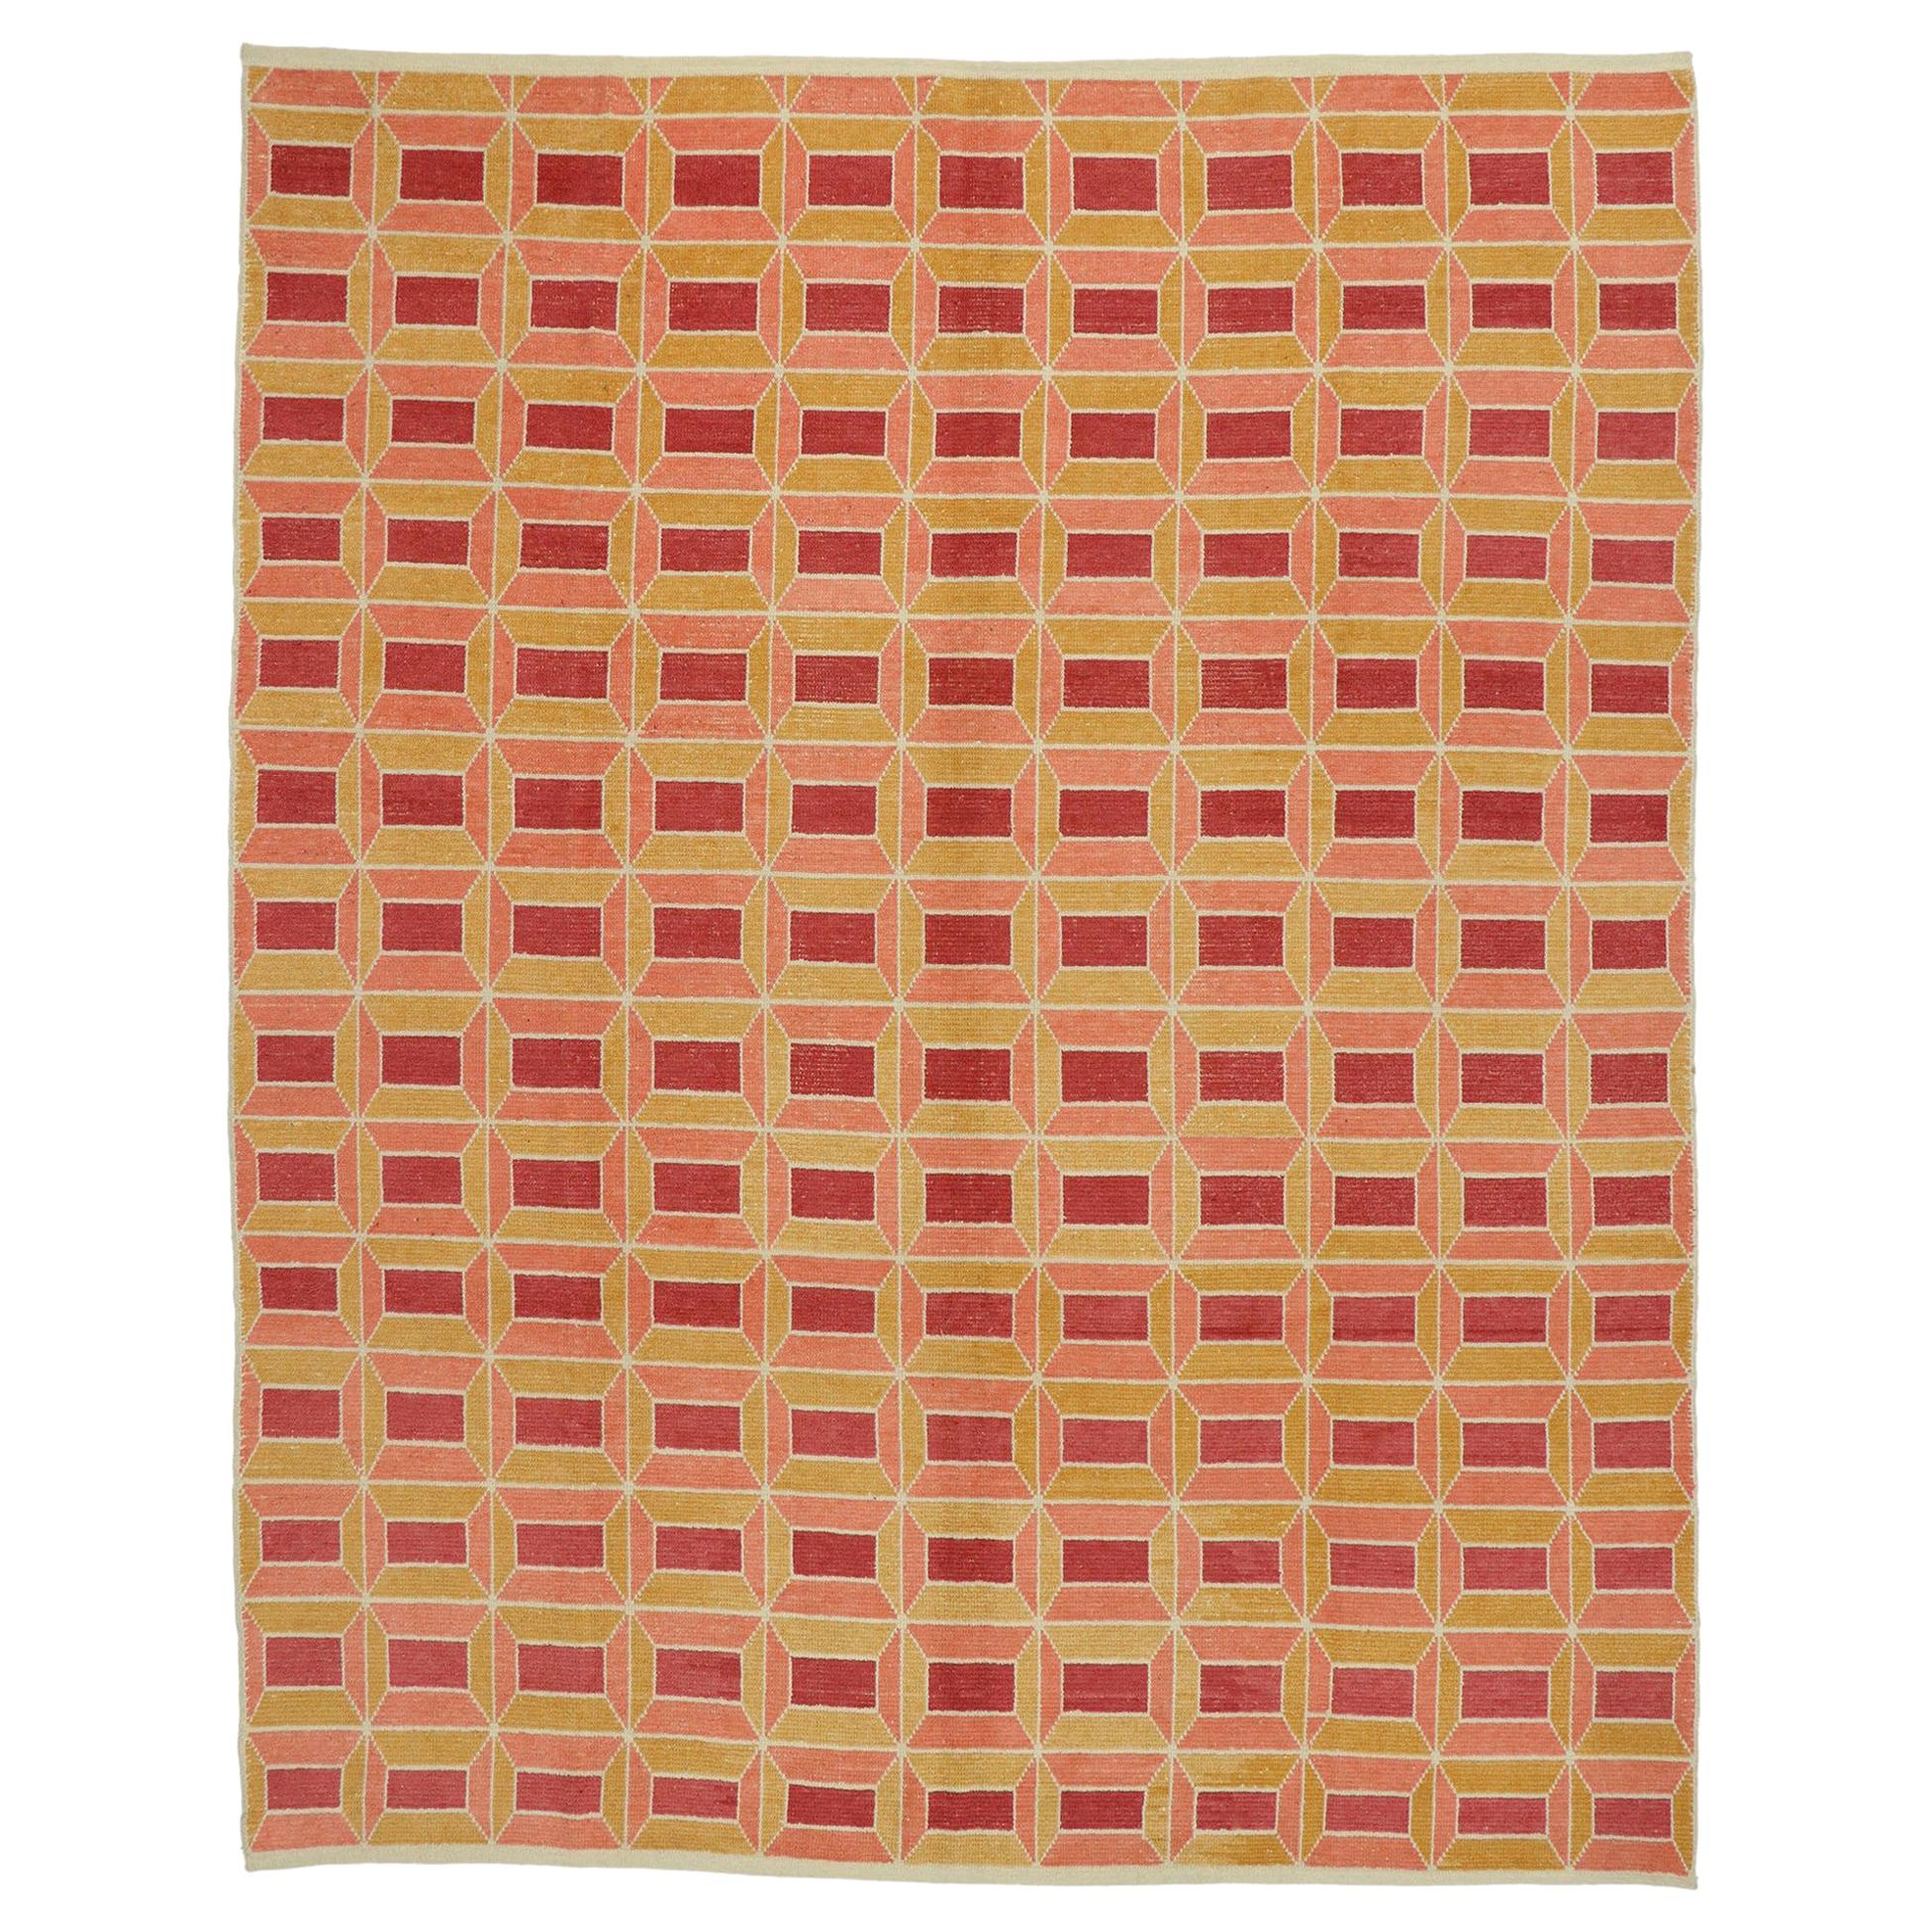 New Contemporary Moroccan Style Rug with Retro Postmodern Cubist Bauhaus Style